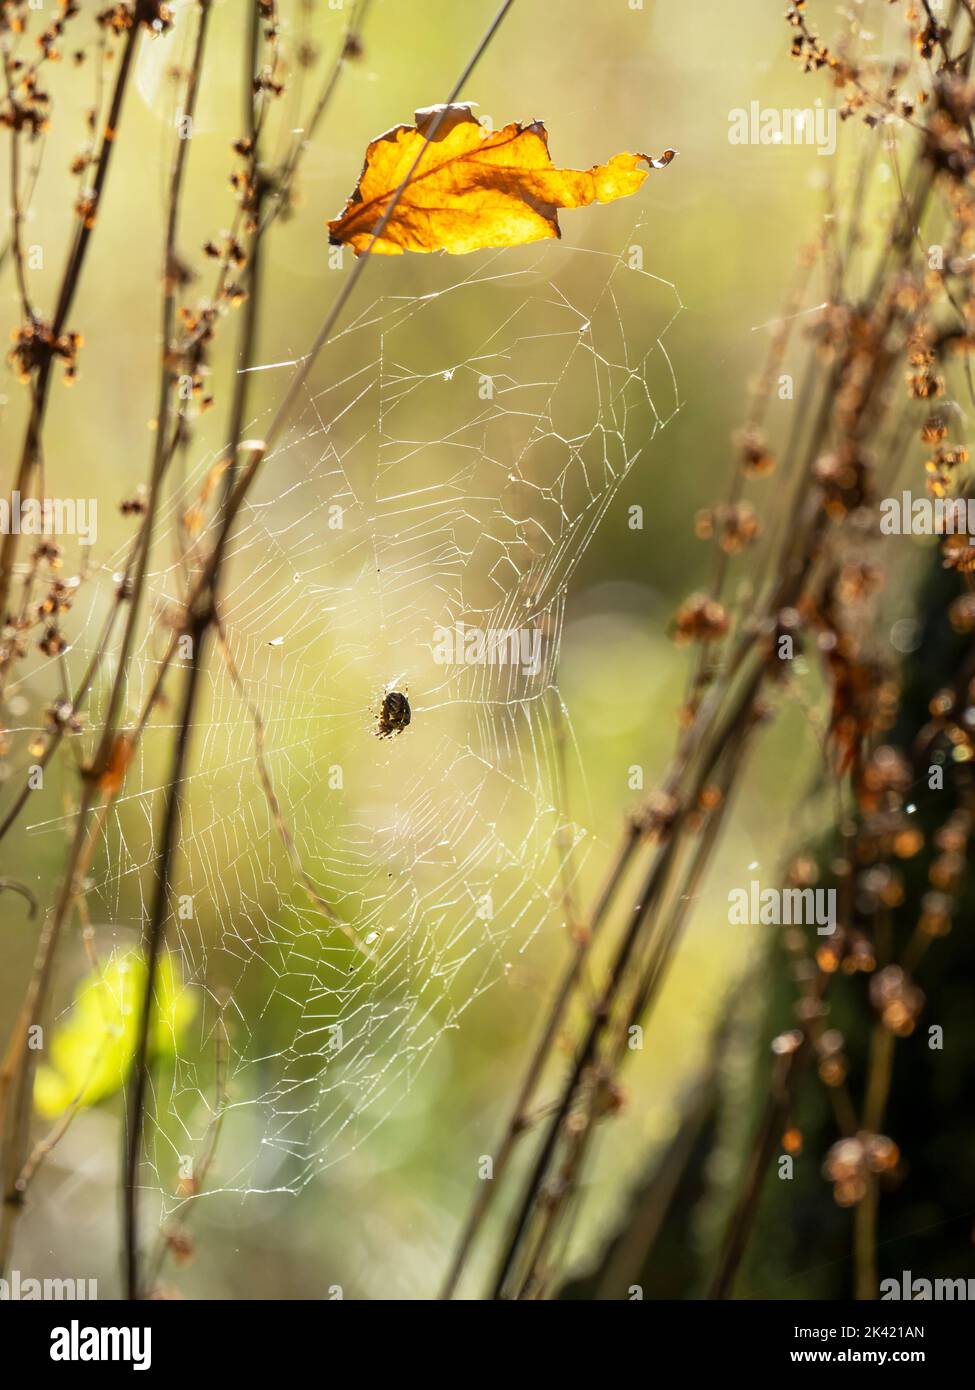 A backlit spiders web and spider in Ambleside, Lake District, UK with a leaf stuck in the web. Stock Photo